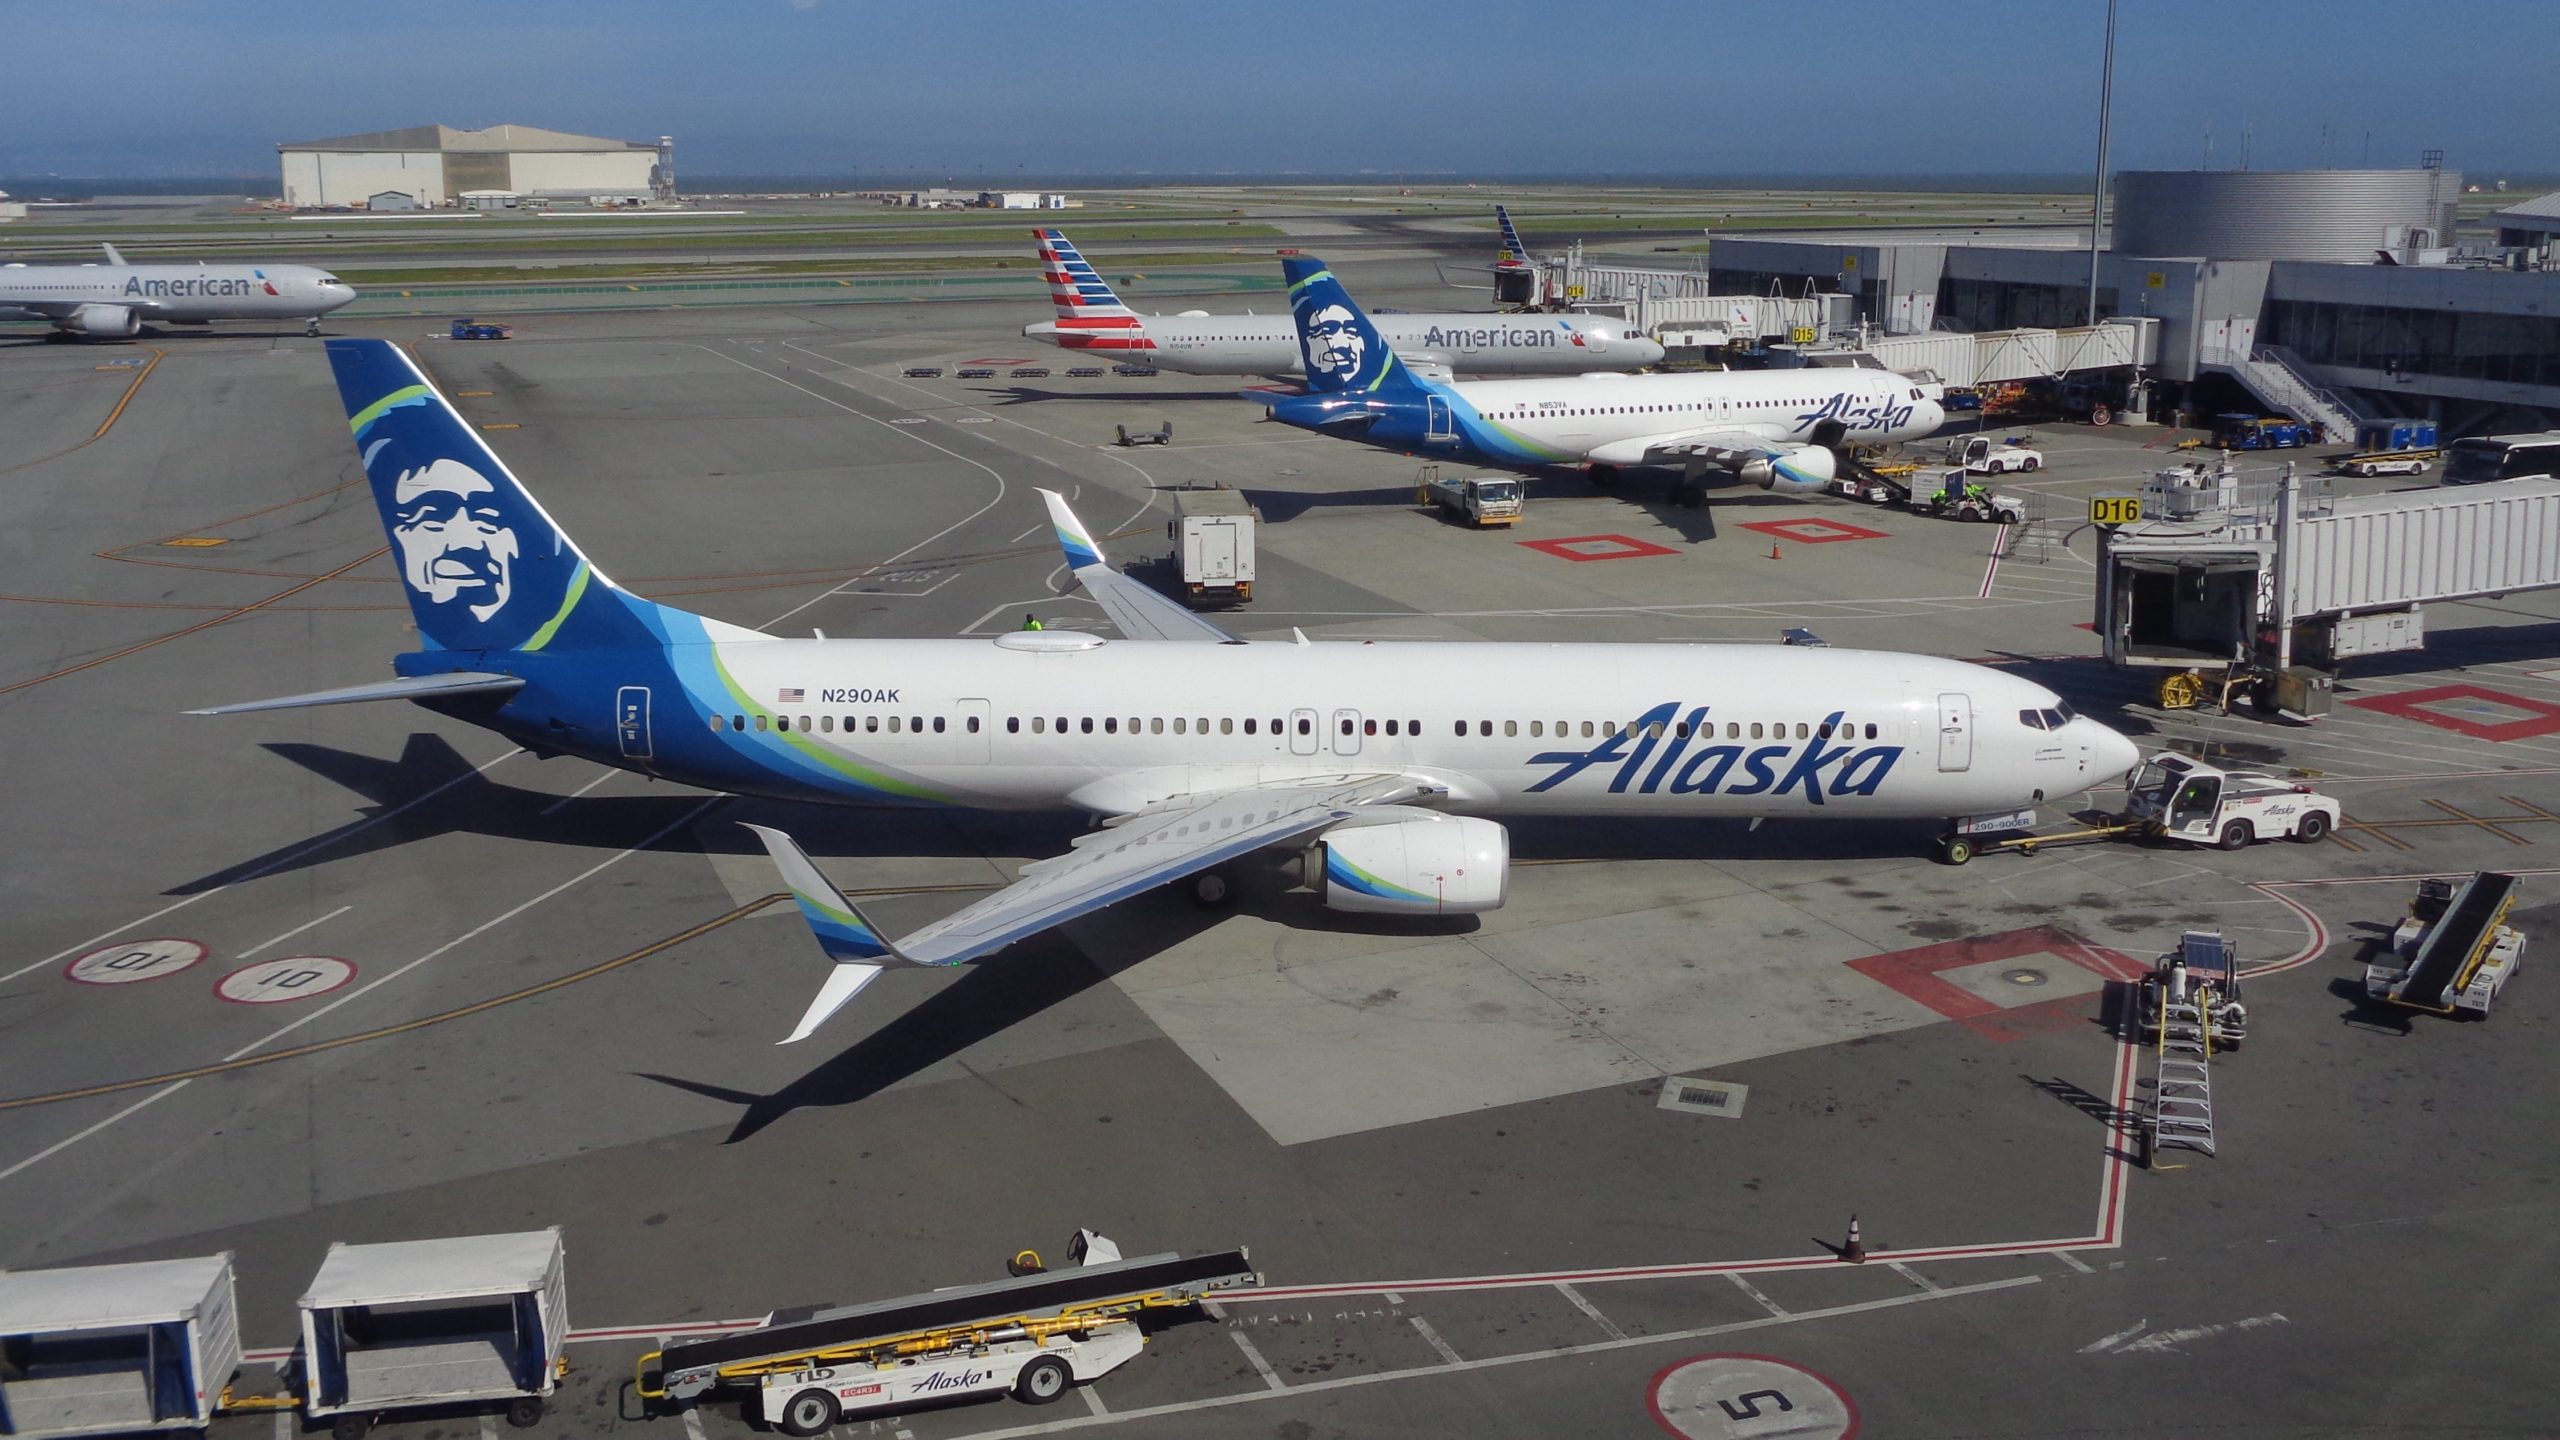 Alaska Airlines Sale, Save Up to 30% on Travel to Hawaii, Mexico, Bahamas and More